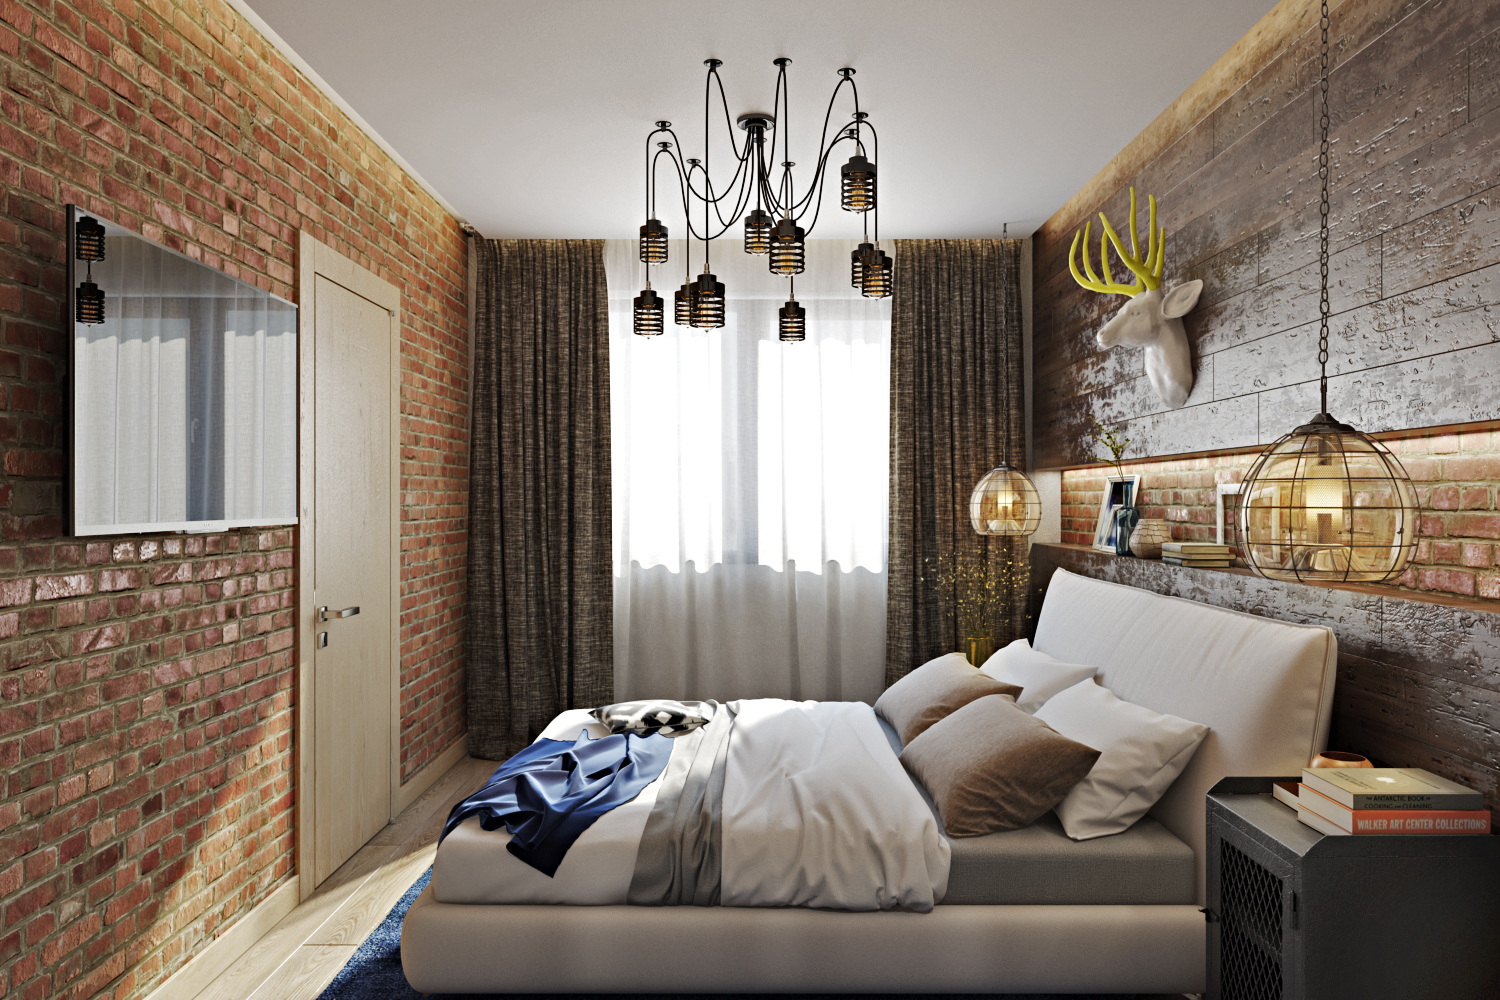 Though the bedroom is small, there are a lot of stylish touches like a brick wall or an industrial metal chandelier